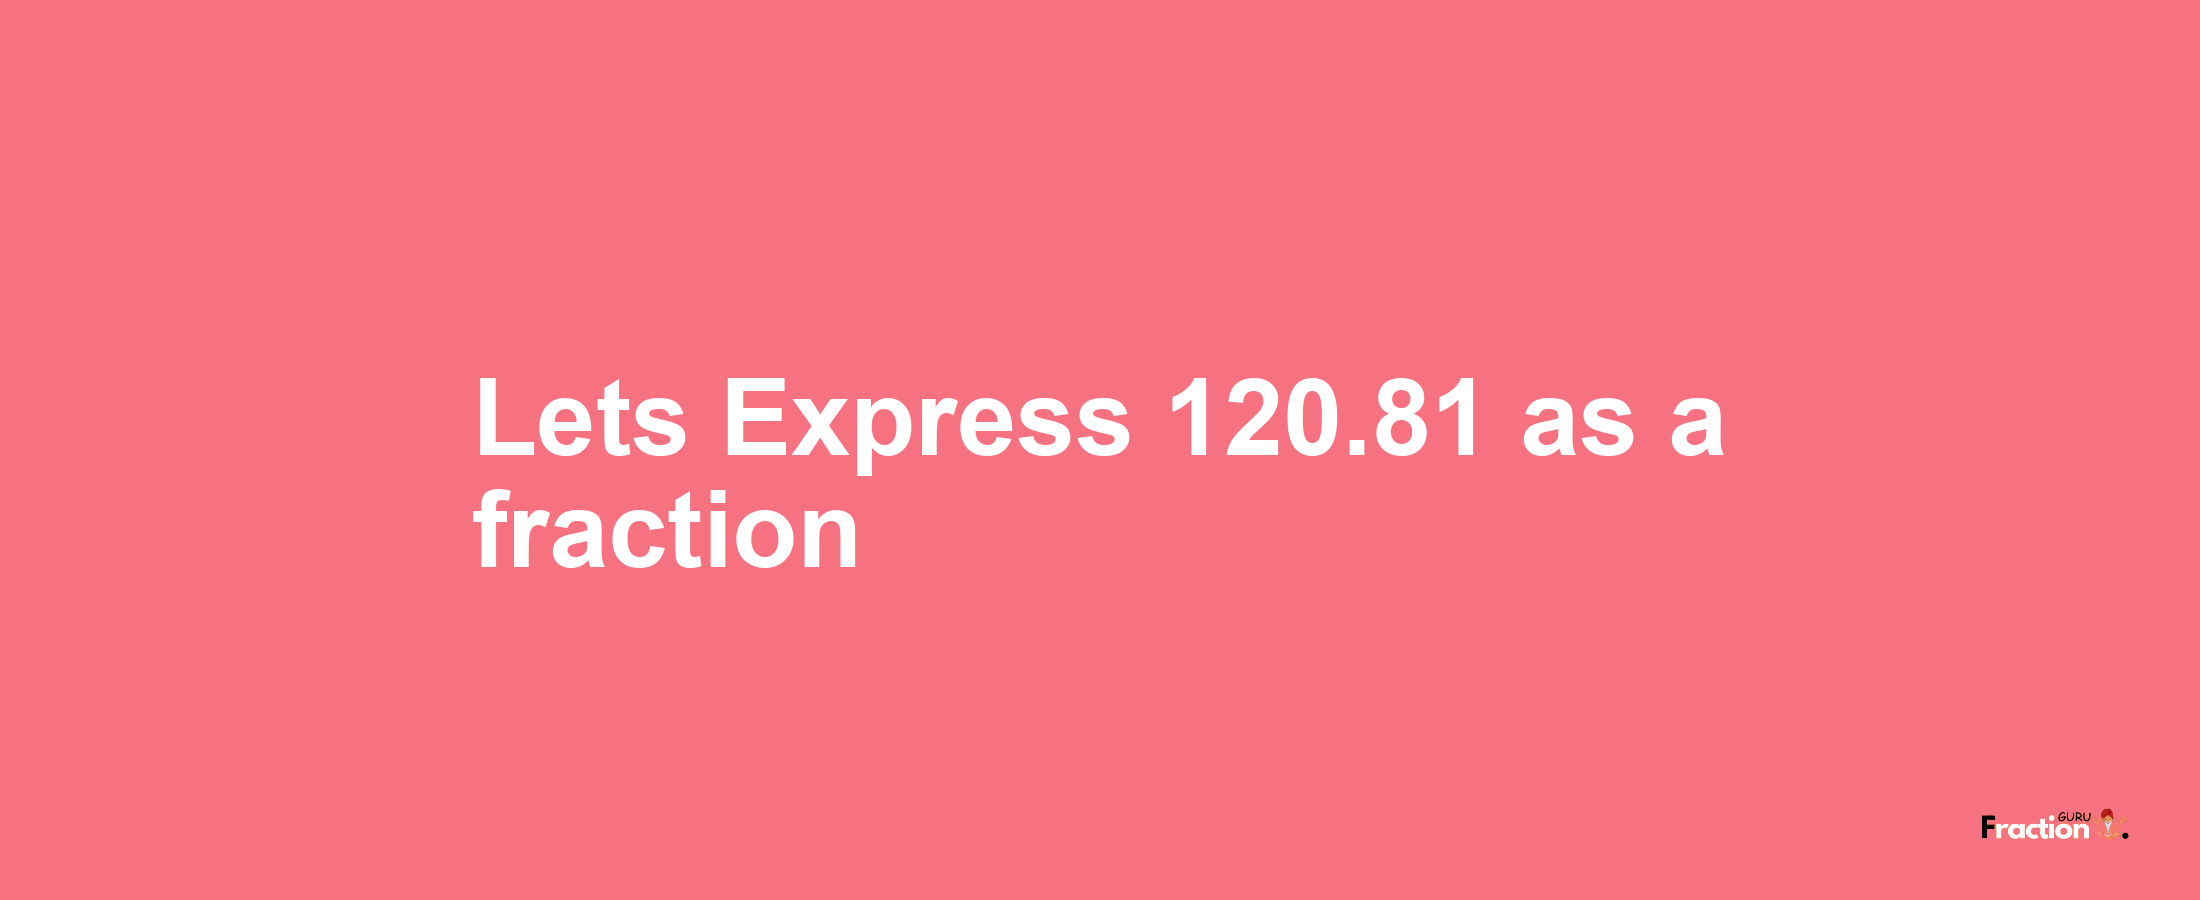 Lets Express 120.81 as afraction